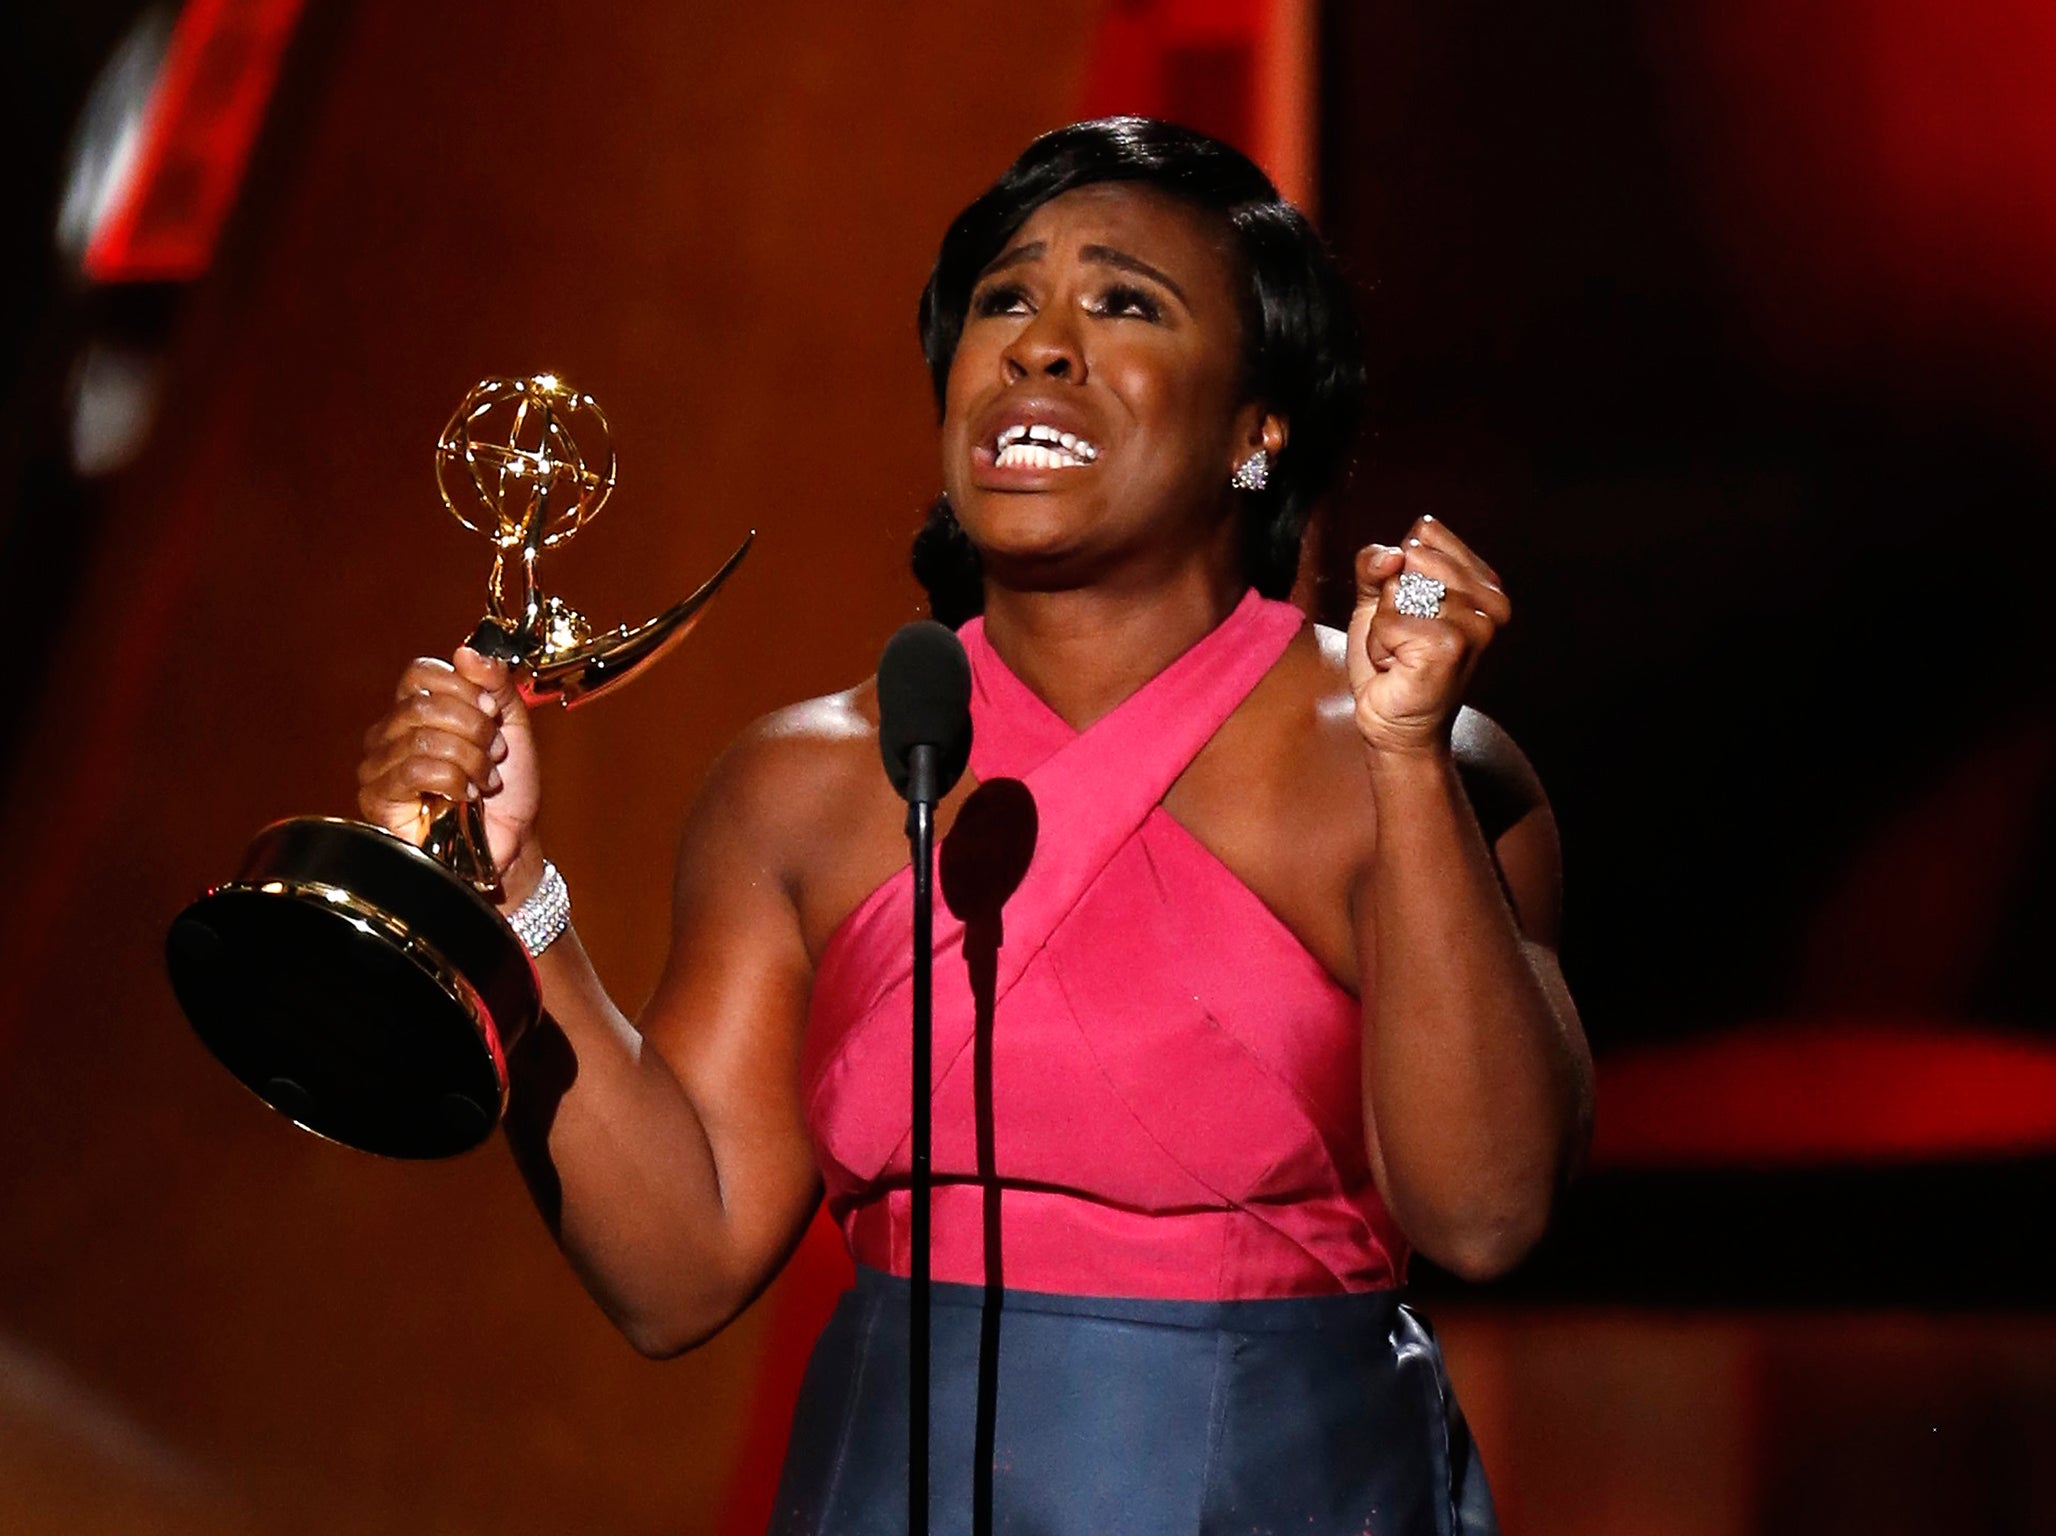 Uzo Aduba accepts the award for Outstanding Supporting Actress In A Drama Series for her role in Netflix's "Orange is the New Black" at the 67th Primetime Emmy Awards in Los Angeles, California September 20, 2015